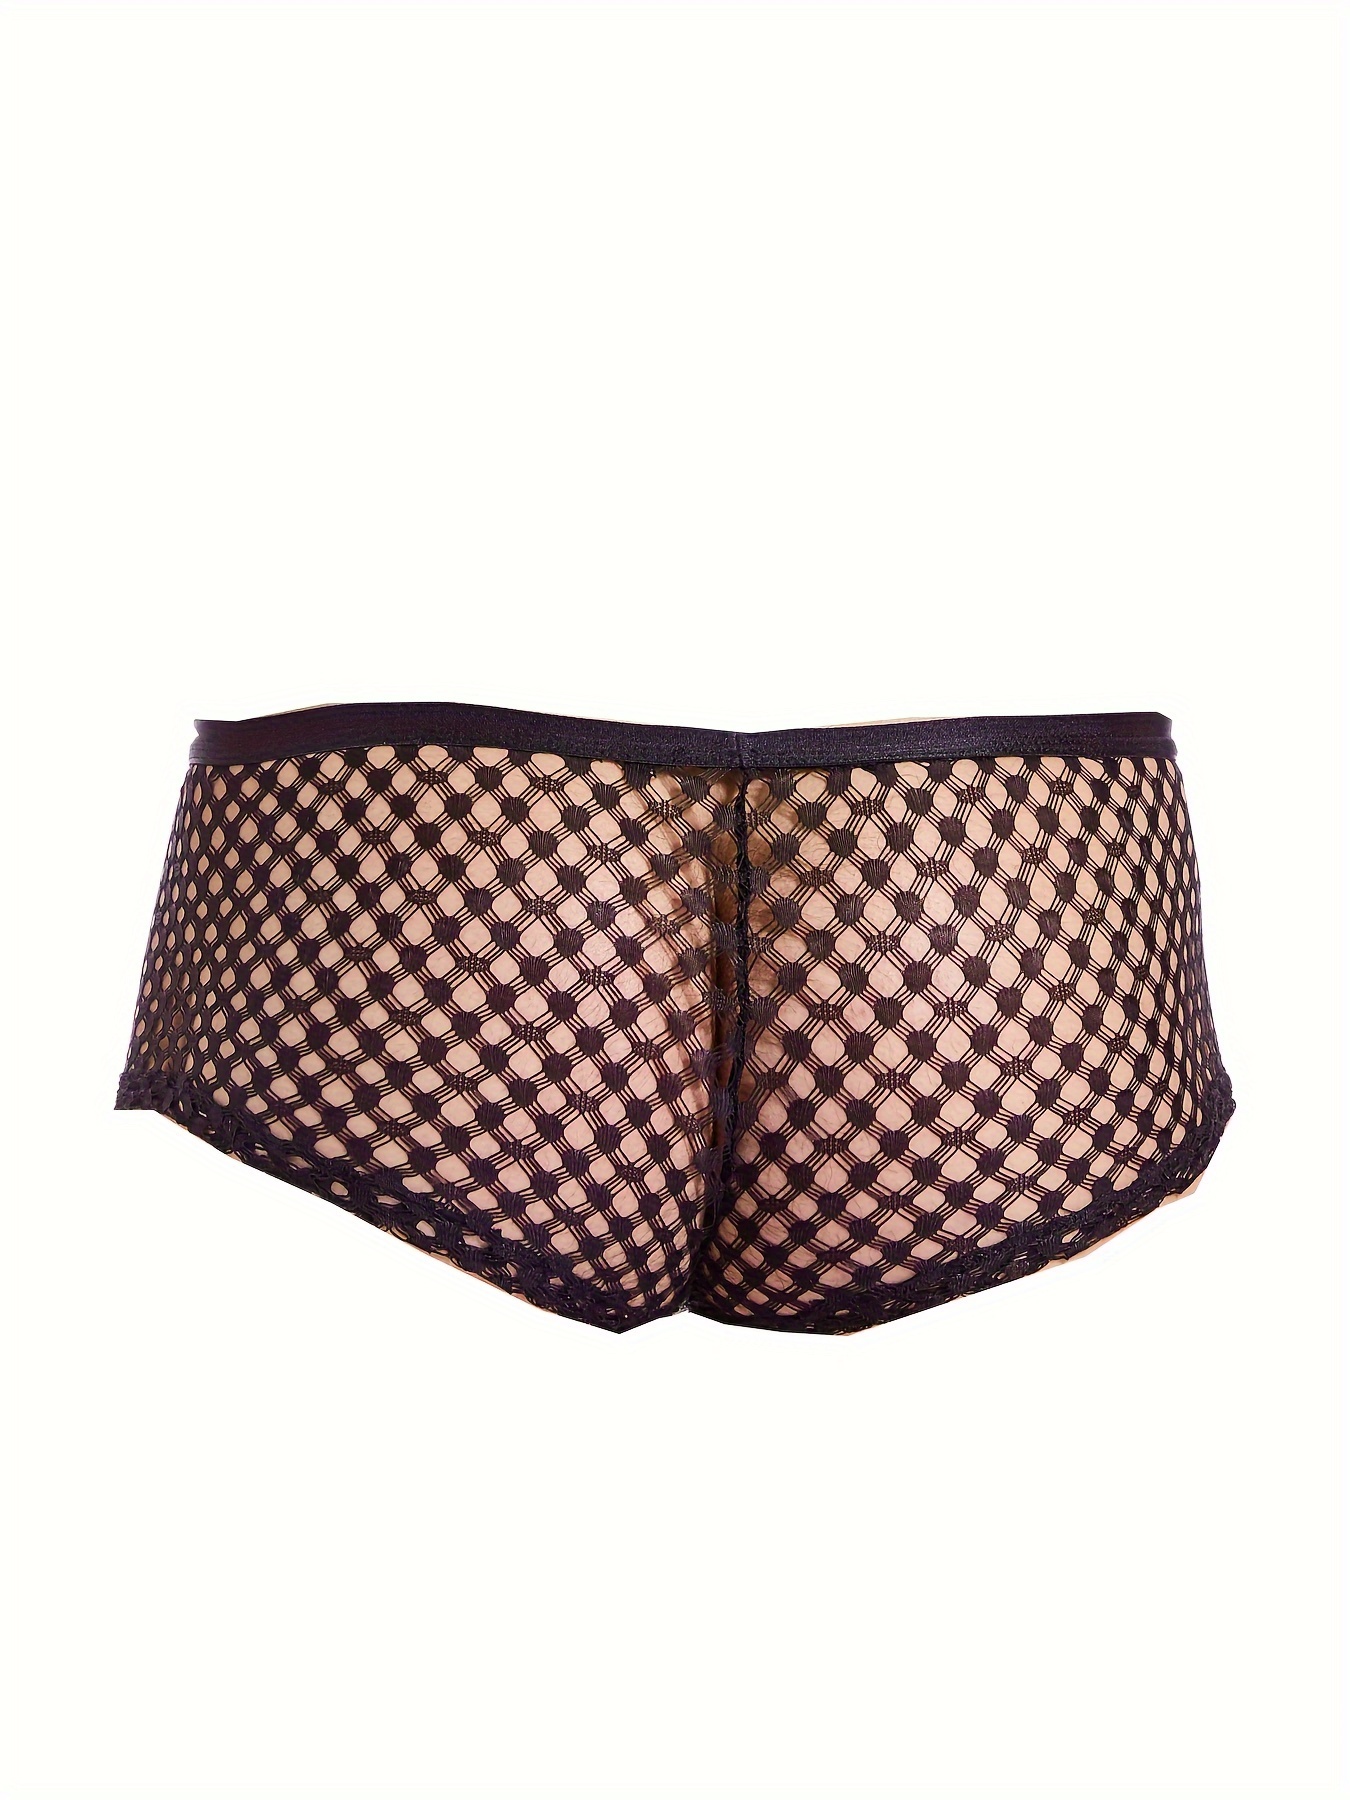 Underpants Sexy Lingerie Men Fishnet See Through Boxer Briefs Sheer Mesh  Pouch Underwear Panties Transparent Intimate Shorts Trunks From Zhoujielu,  $20.85